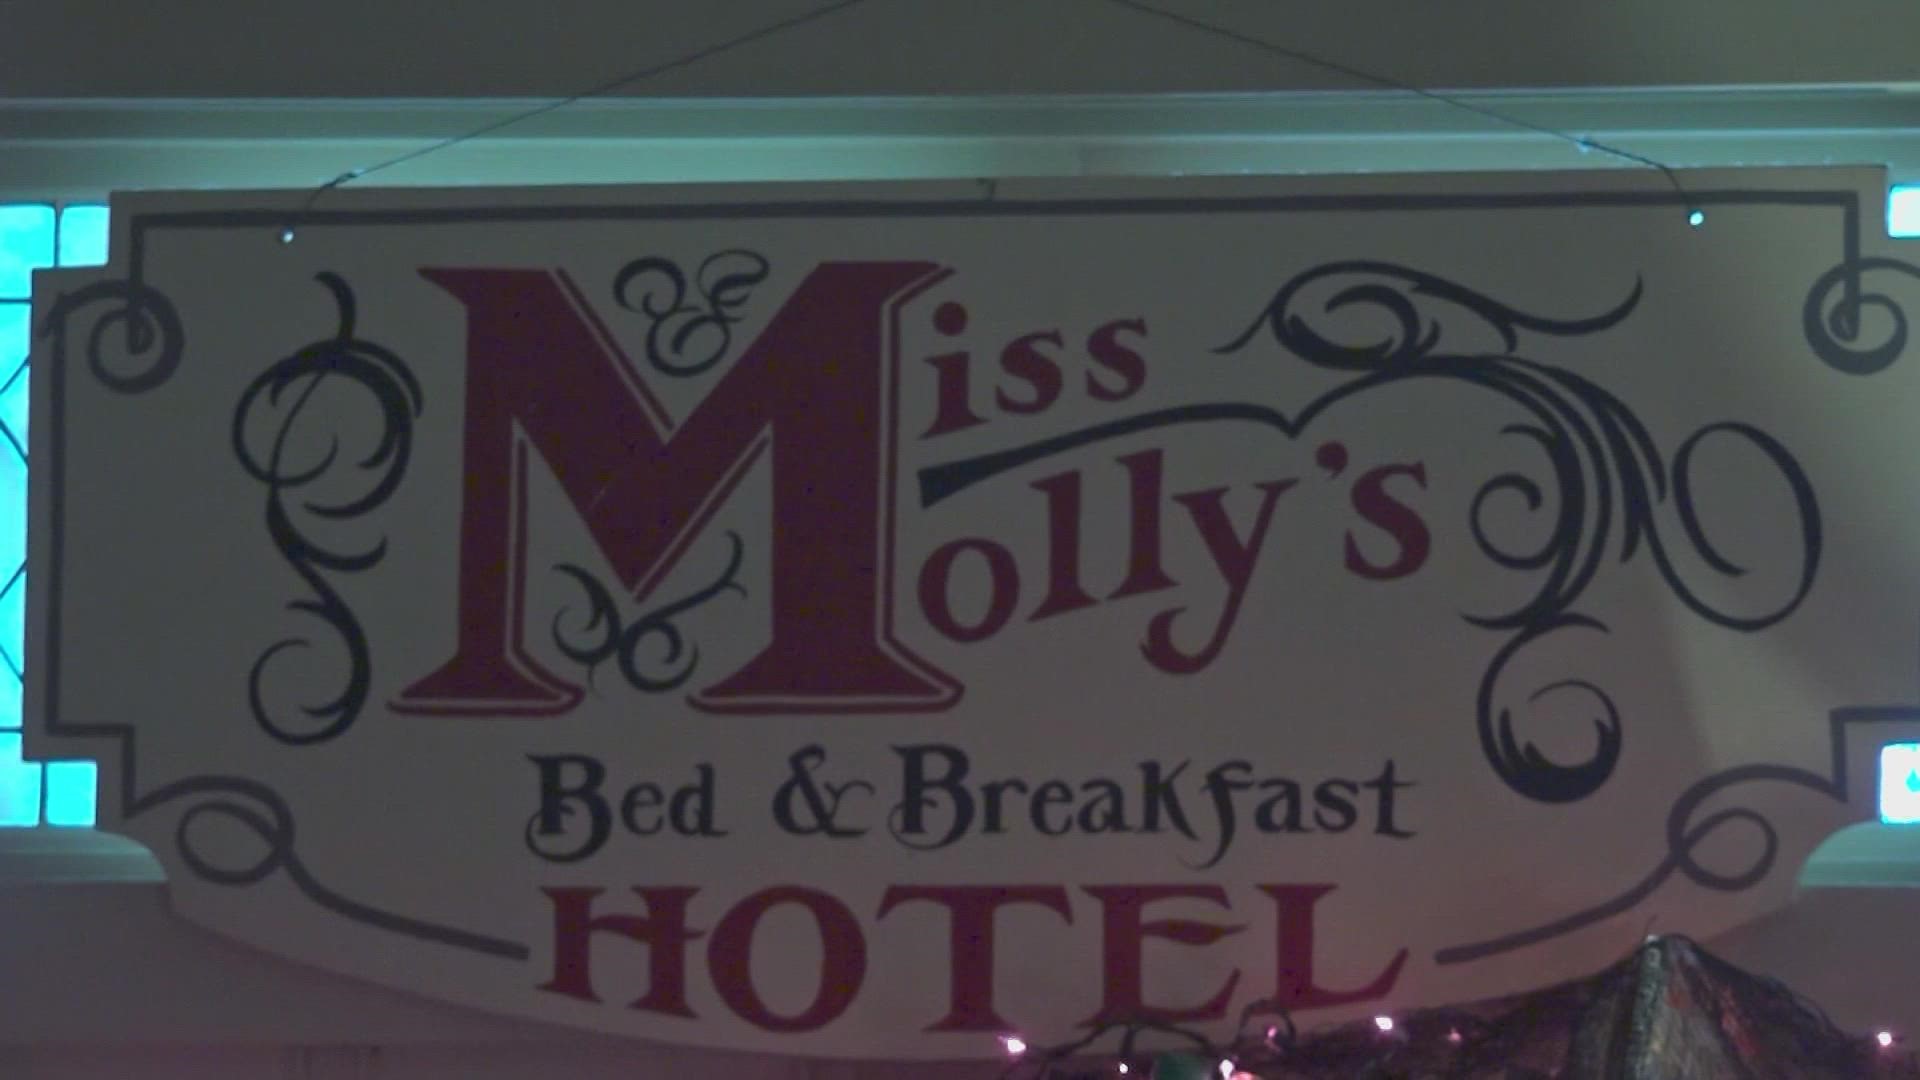 Fair warning: anyone who checks out the Fort Worth Stockyards may want to think twice before checking in at Miss Molly’s Hotel.